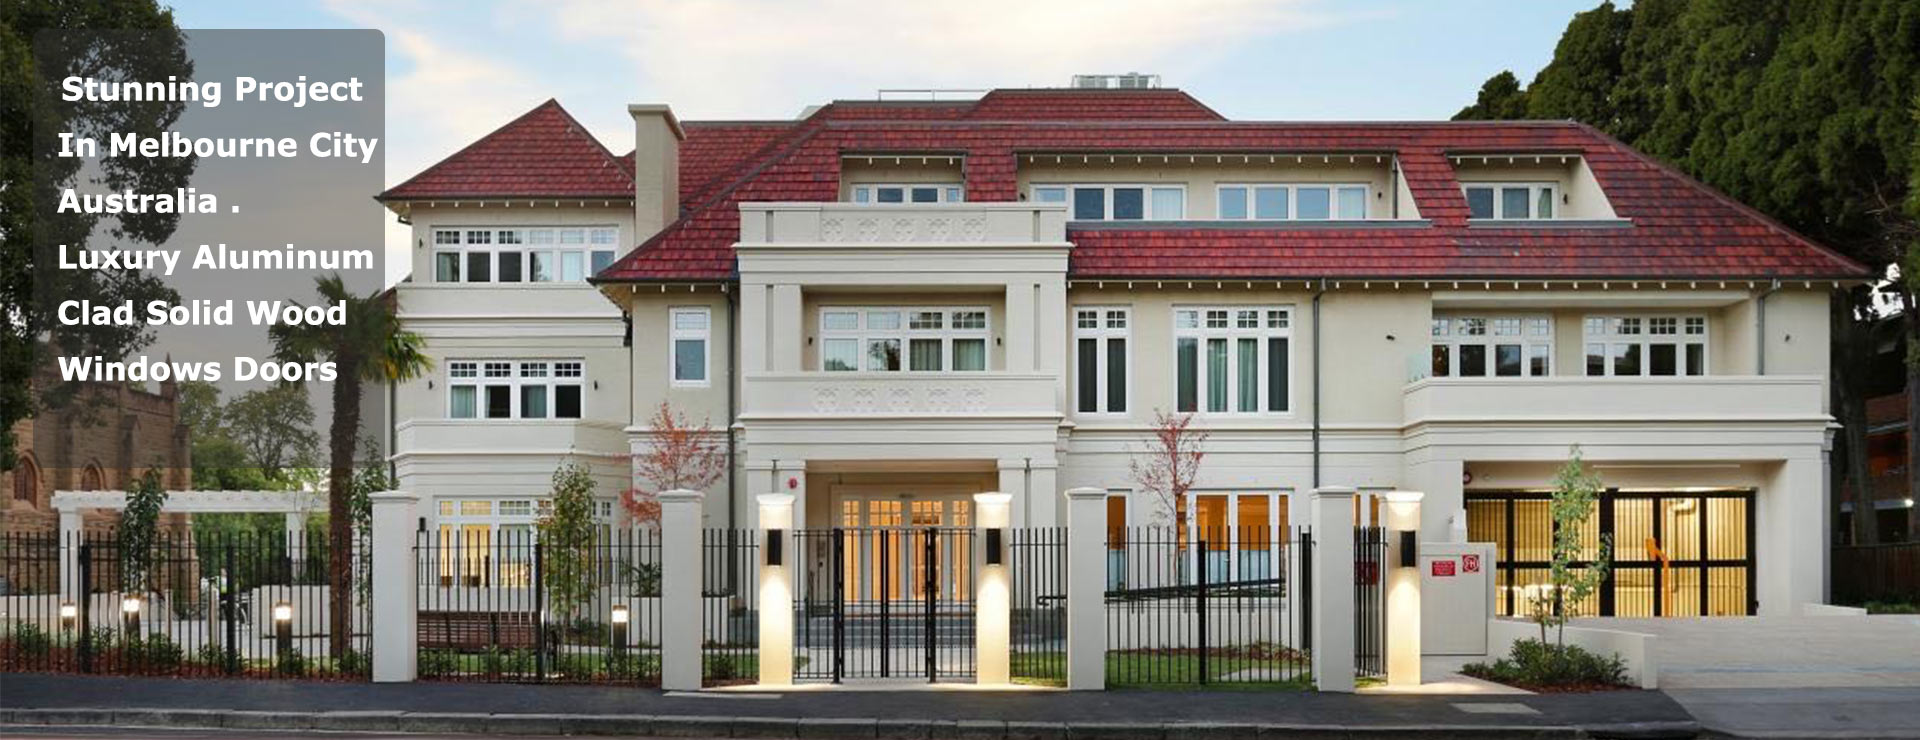 Stunning project in Melbourne Astralia